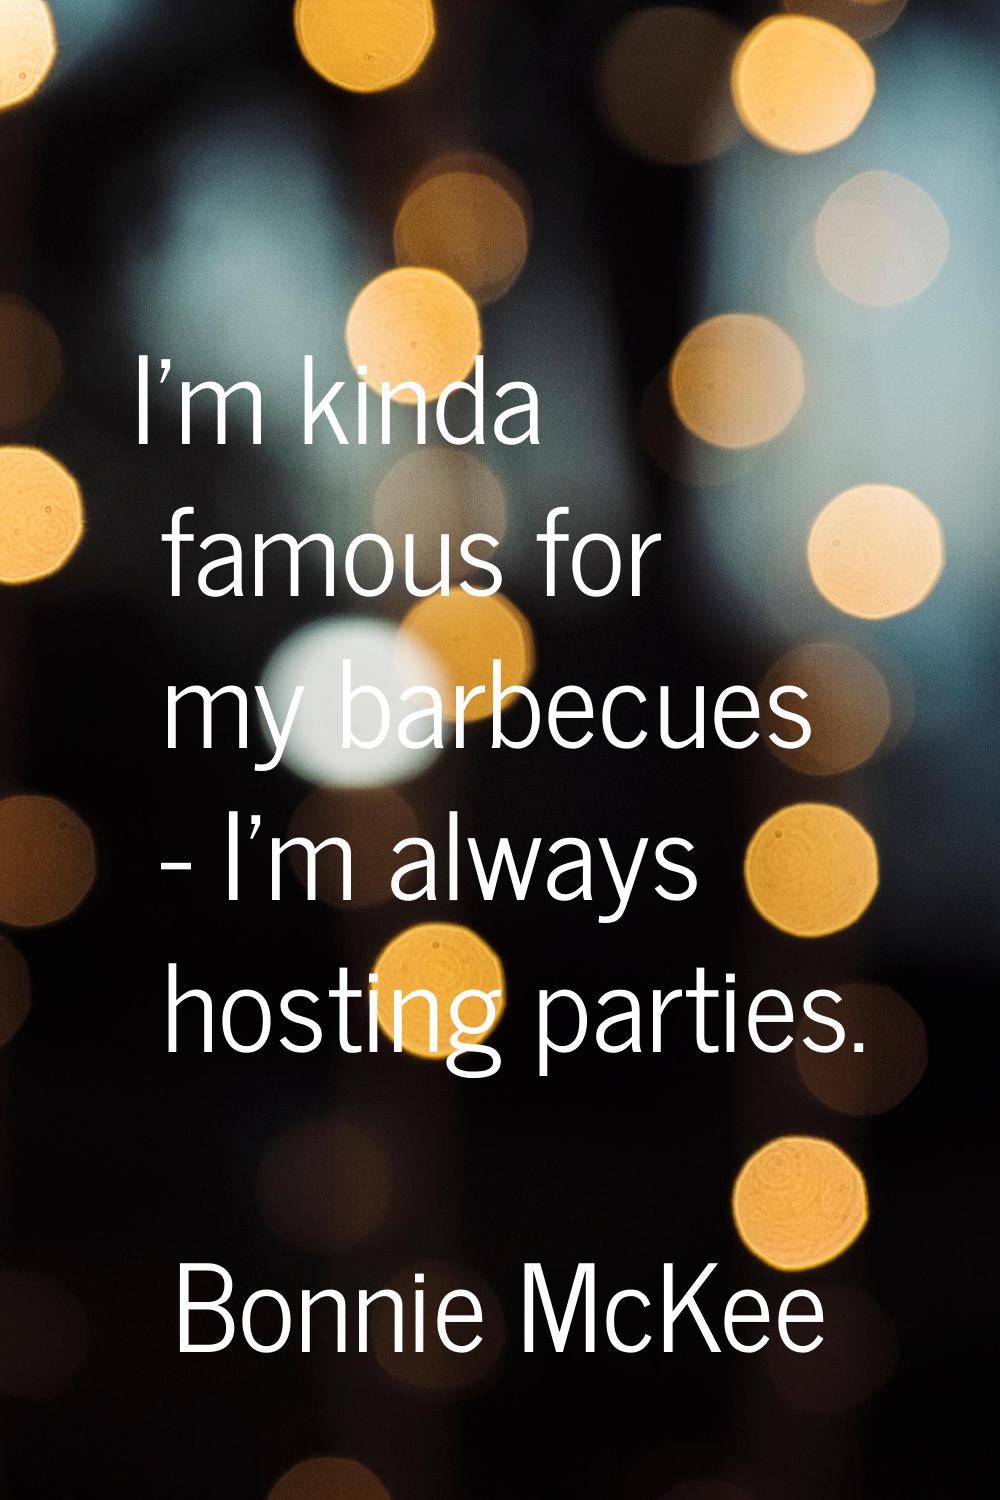 I'm kinda famous for my barbecues - I'm always hosting parties.